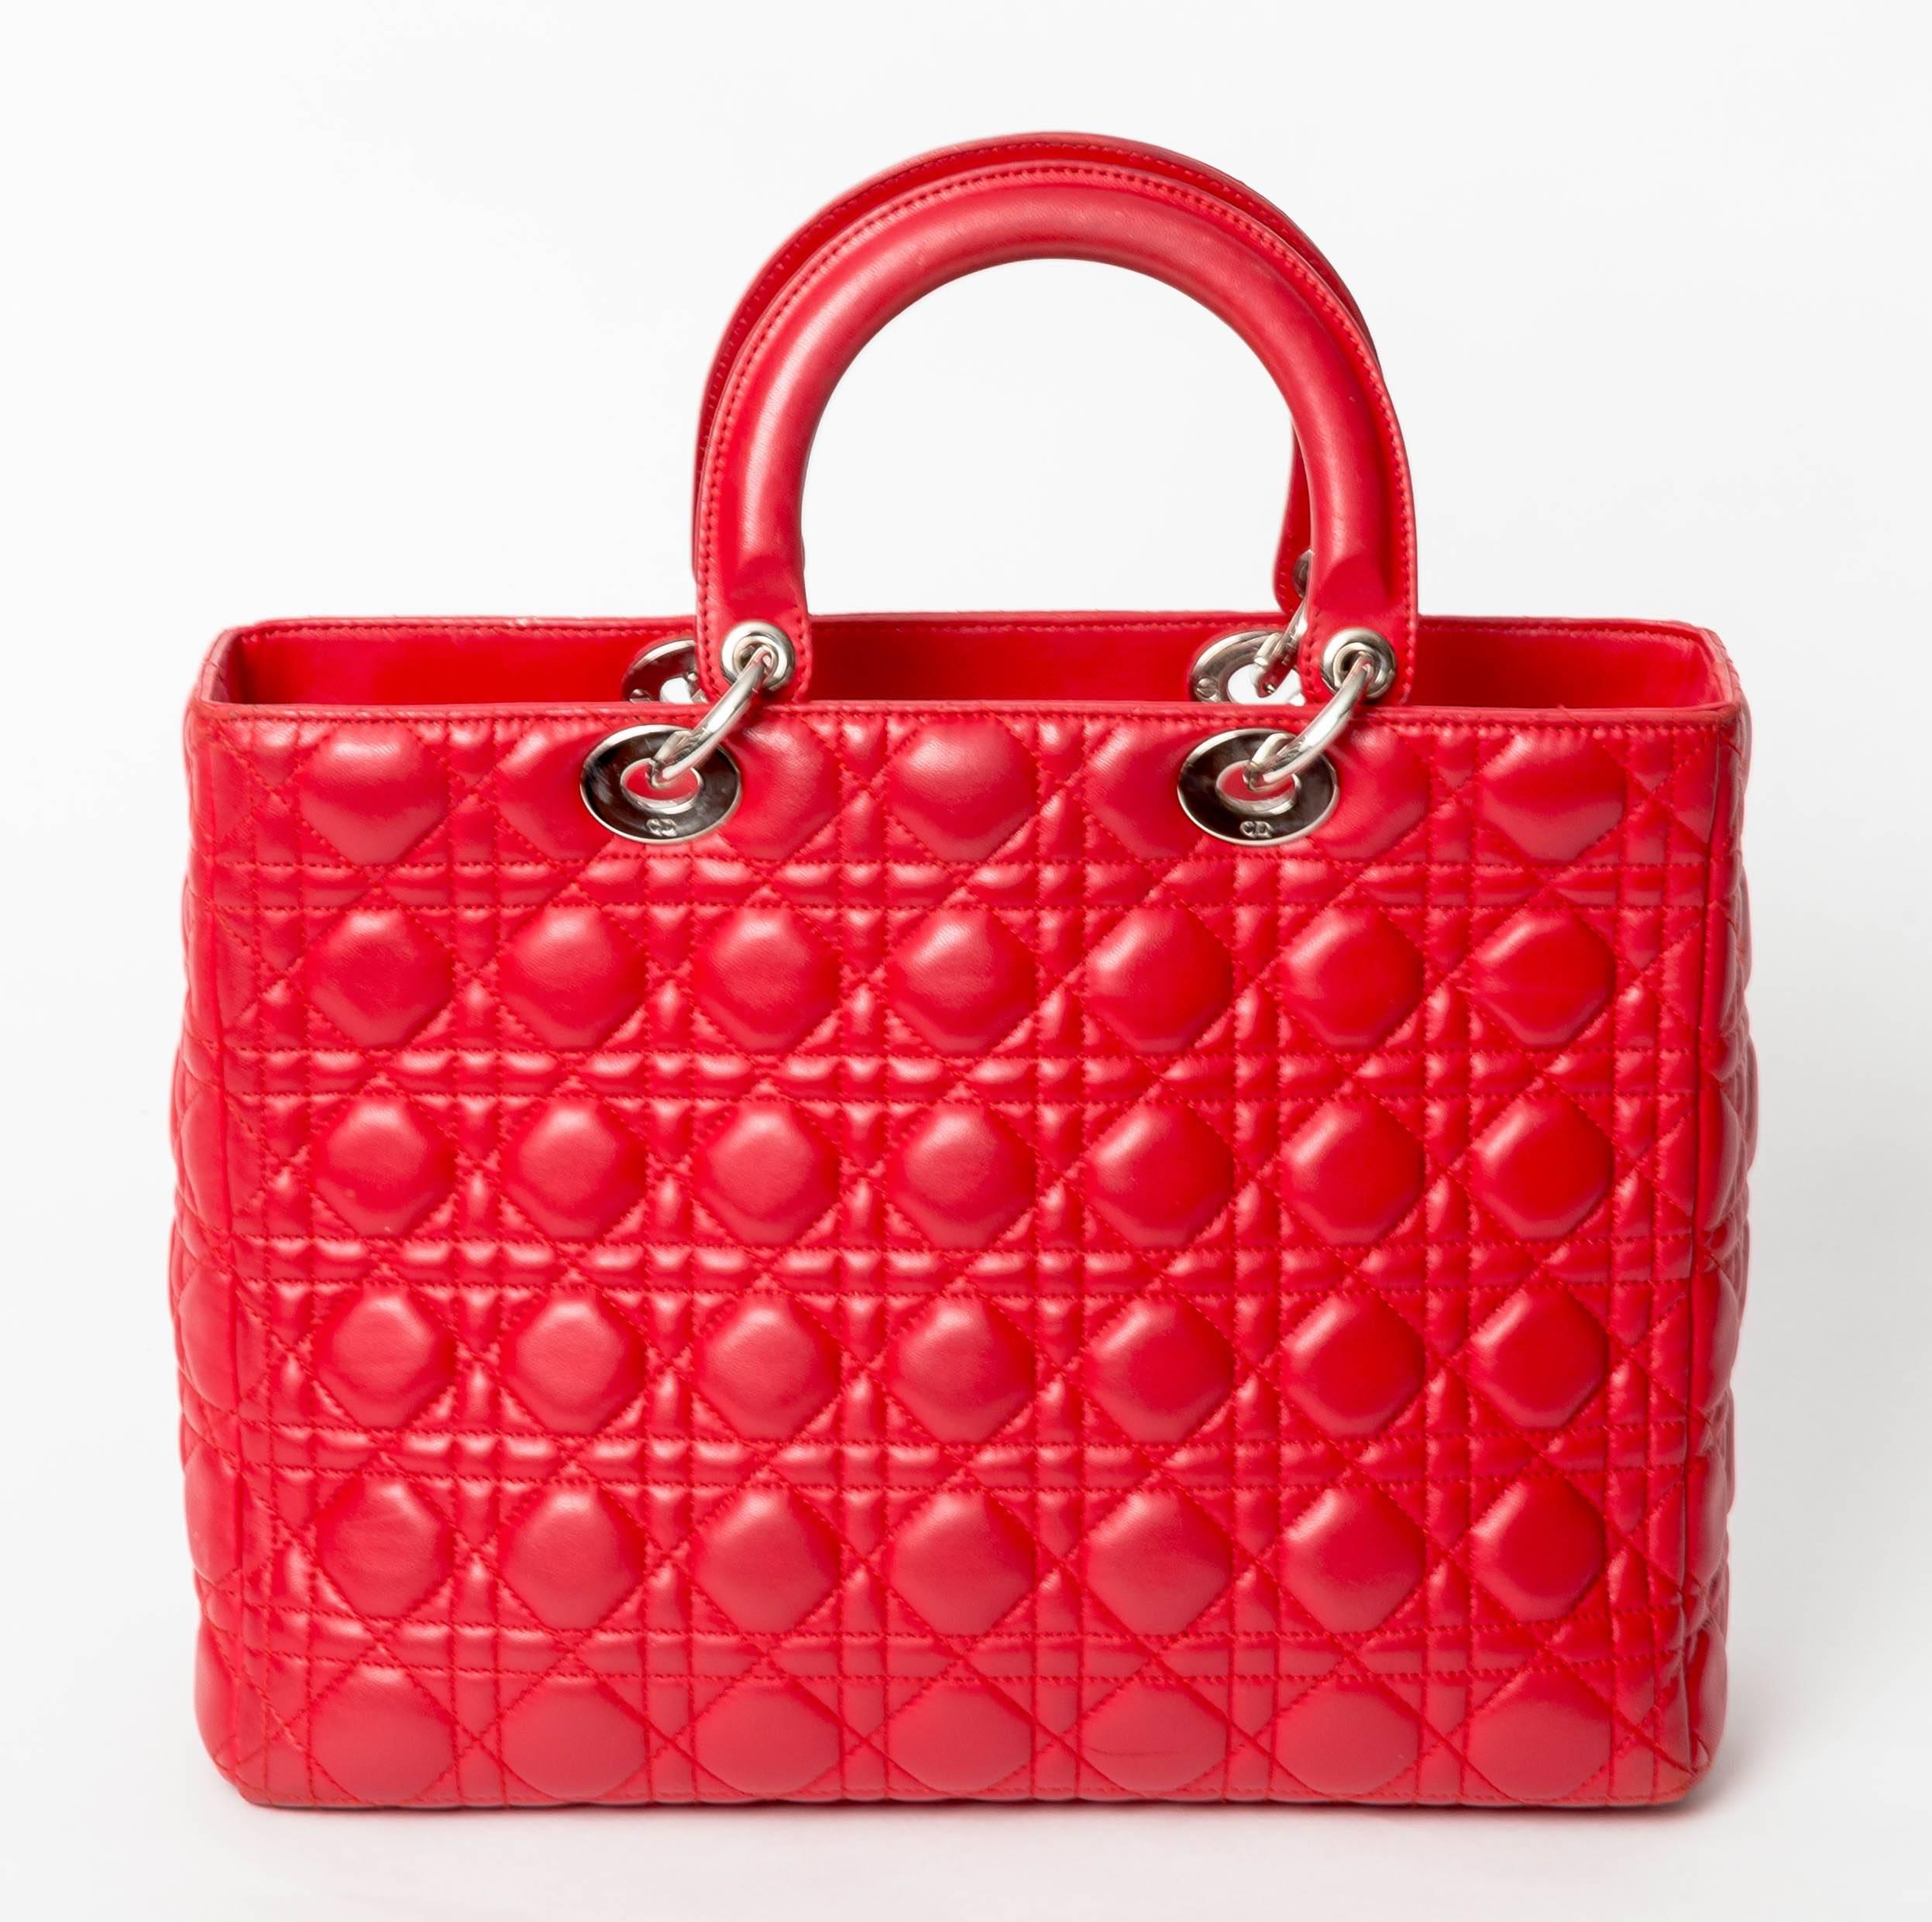 Christian Dior Large Lady Dior in Red Quilted Cannage Lambskin Tote features
double flat rigid leather top handles and a removable shoulder strap,single zip closure,Christian Dior jacquard textile lining, one large zippered interior pocket, and